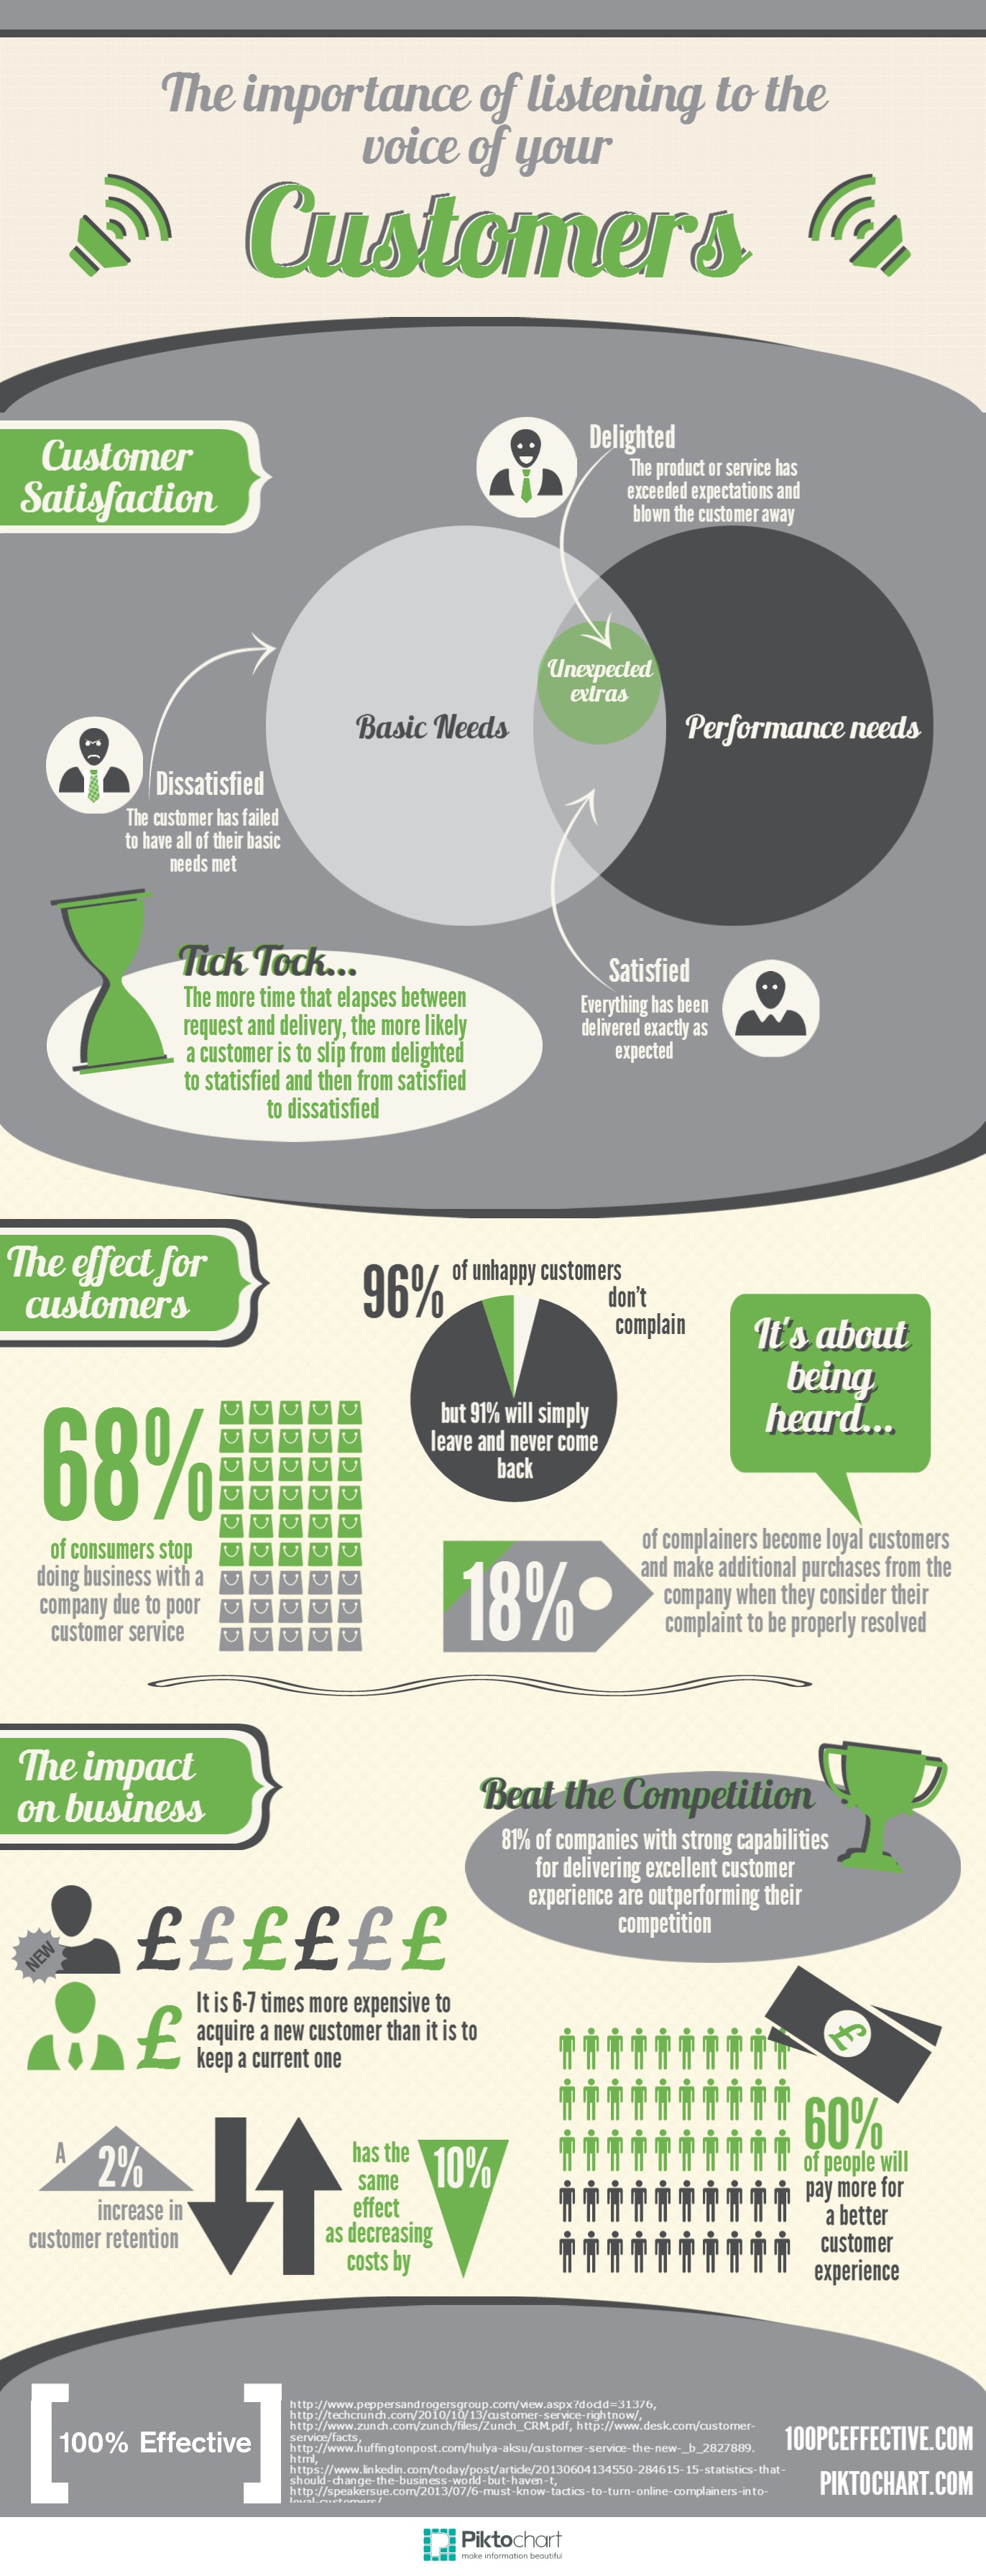 Voice of the customer infographic